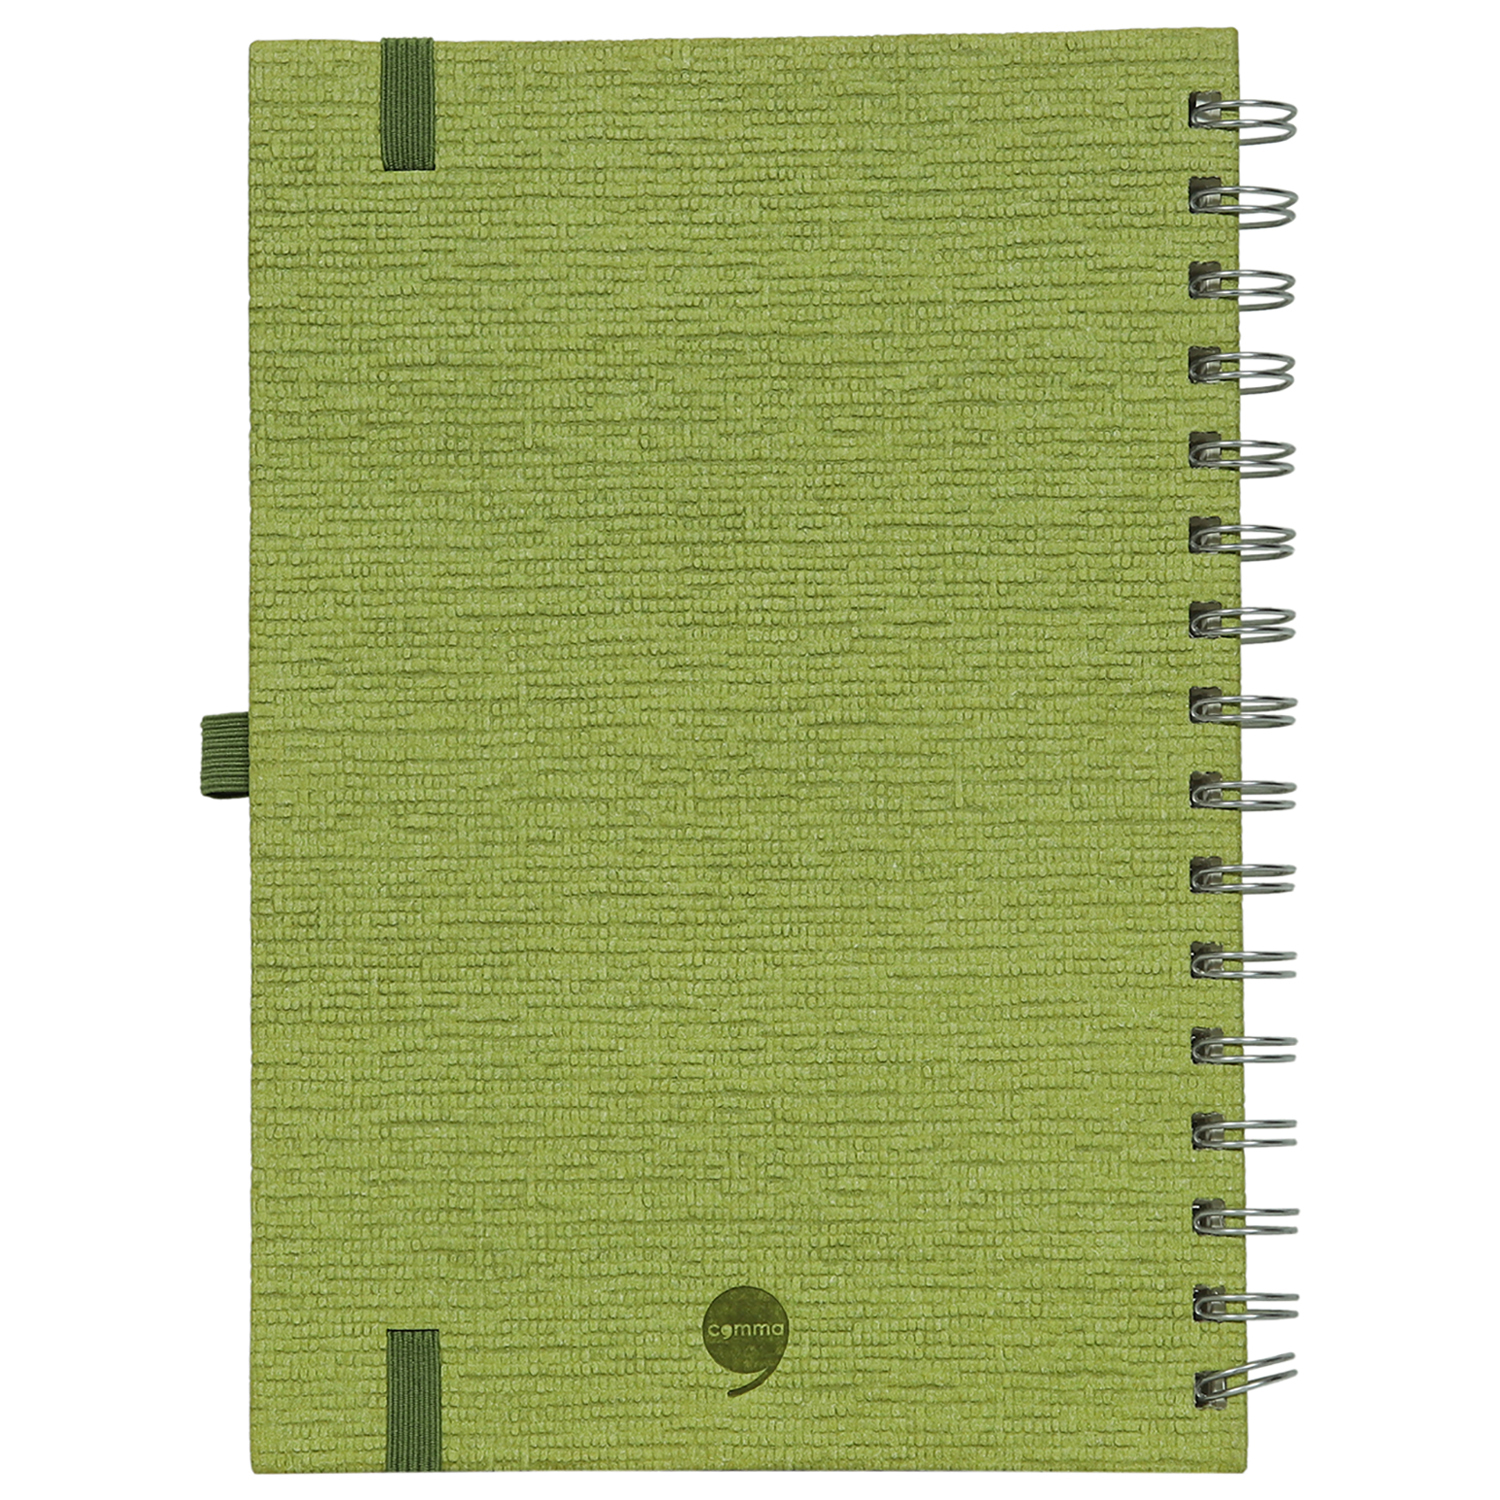 Comma Abaca - A5 Size - Wire-O-Bound Notebook (Green)